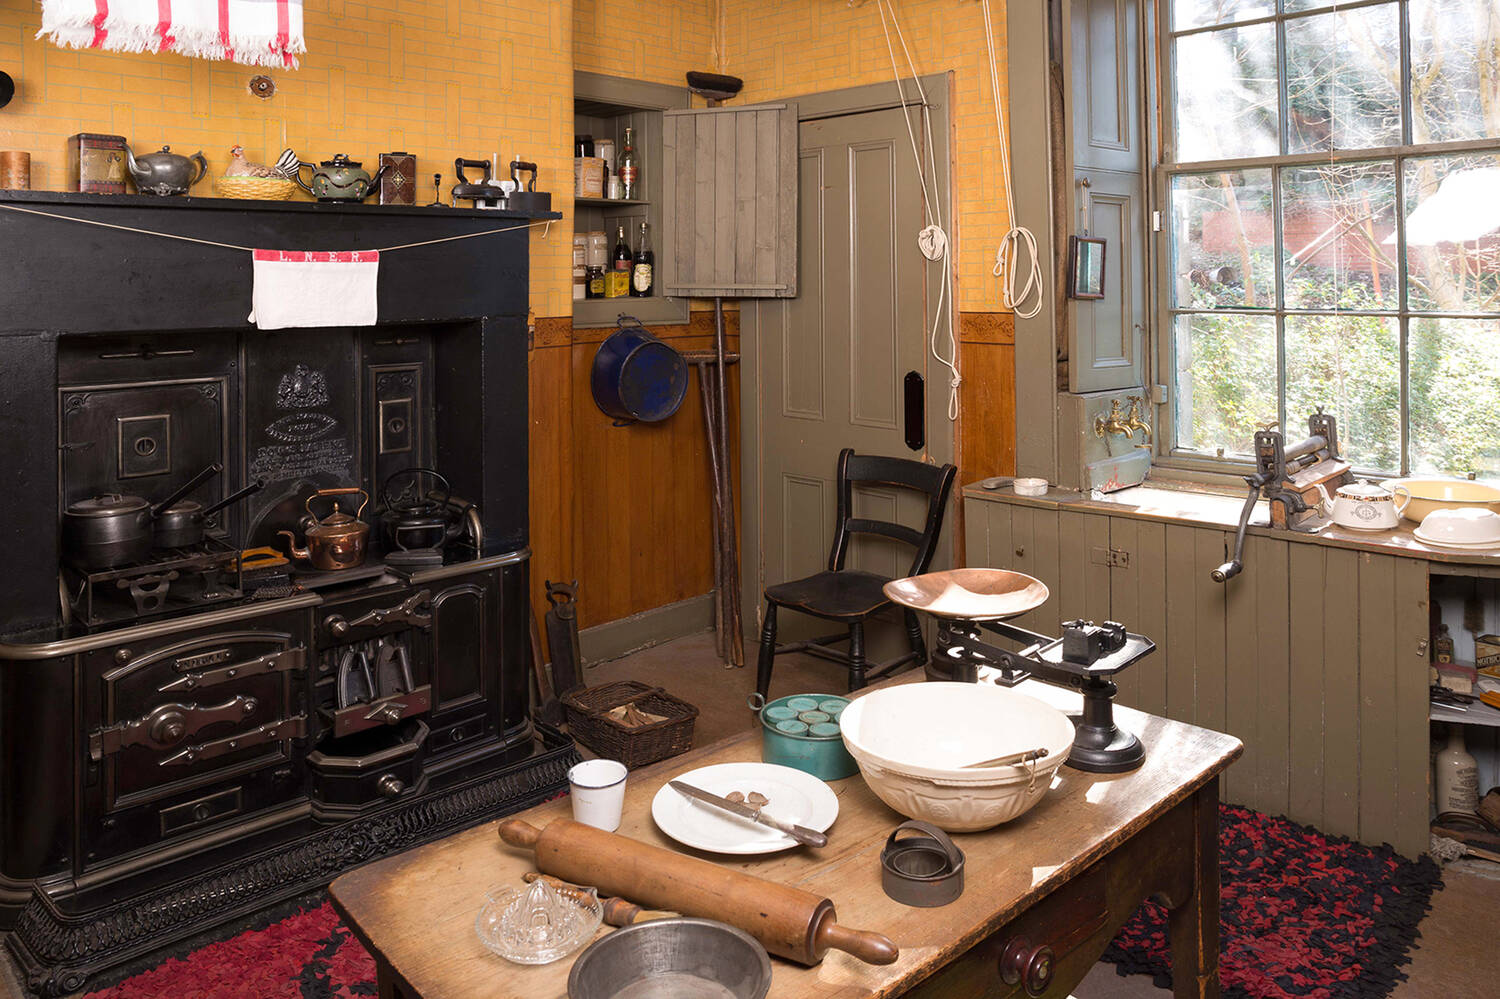 A view of a kitchen in a tenement flat, displayed as it may have looked in the mid-20th century. A large wooden table stands in the middle of the room, with mixing bowls, weighing scales and a rolling pin laid out on top. A black cooking range stands at the side, with cloths hanging from a washing line suspended in front. A sink with wooden cupboards beneath stands in front of a large sash window.